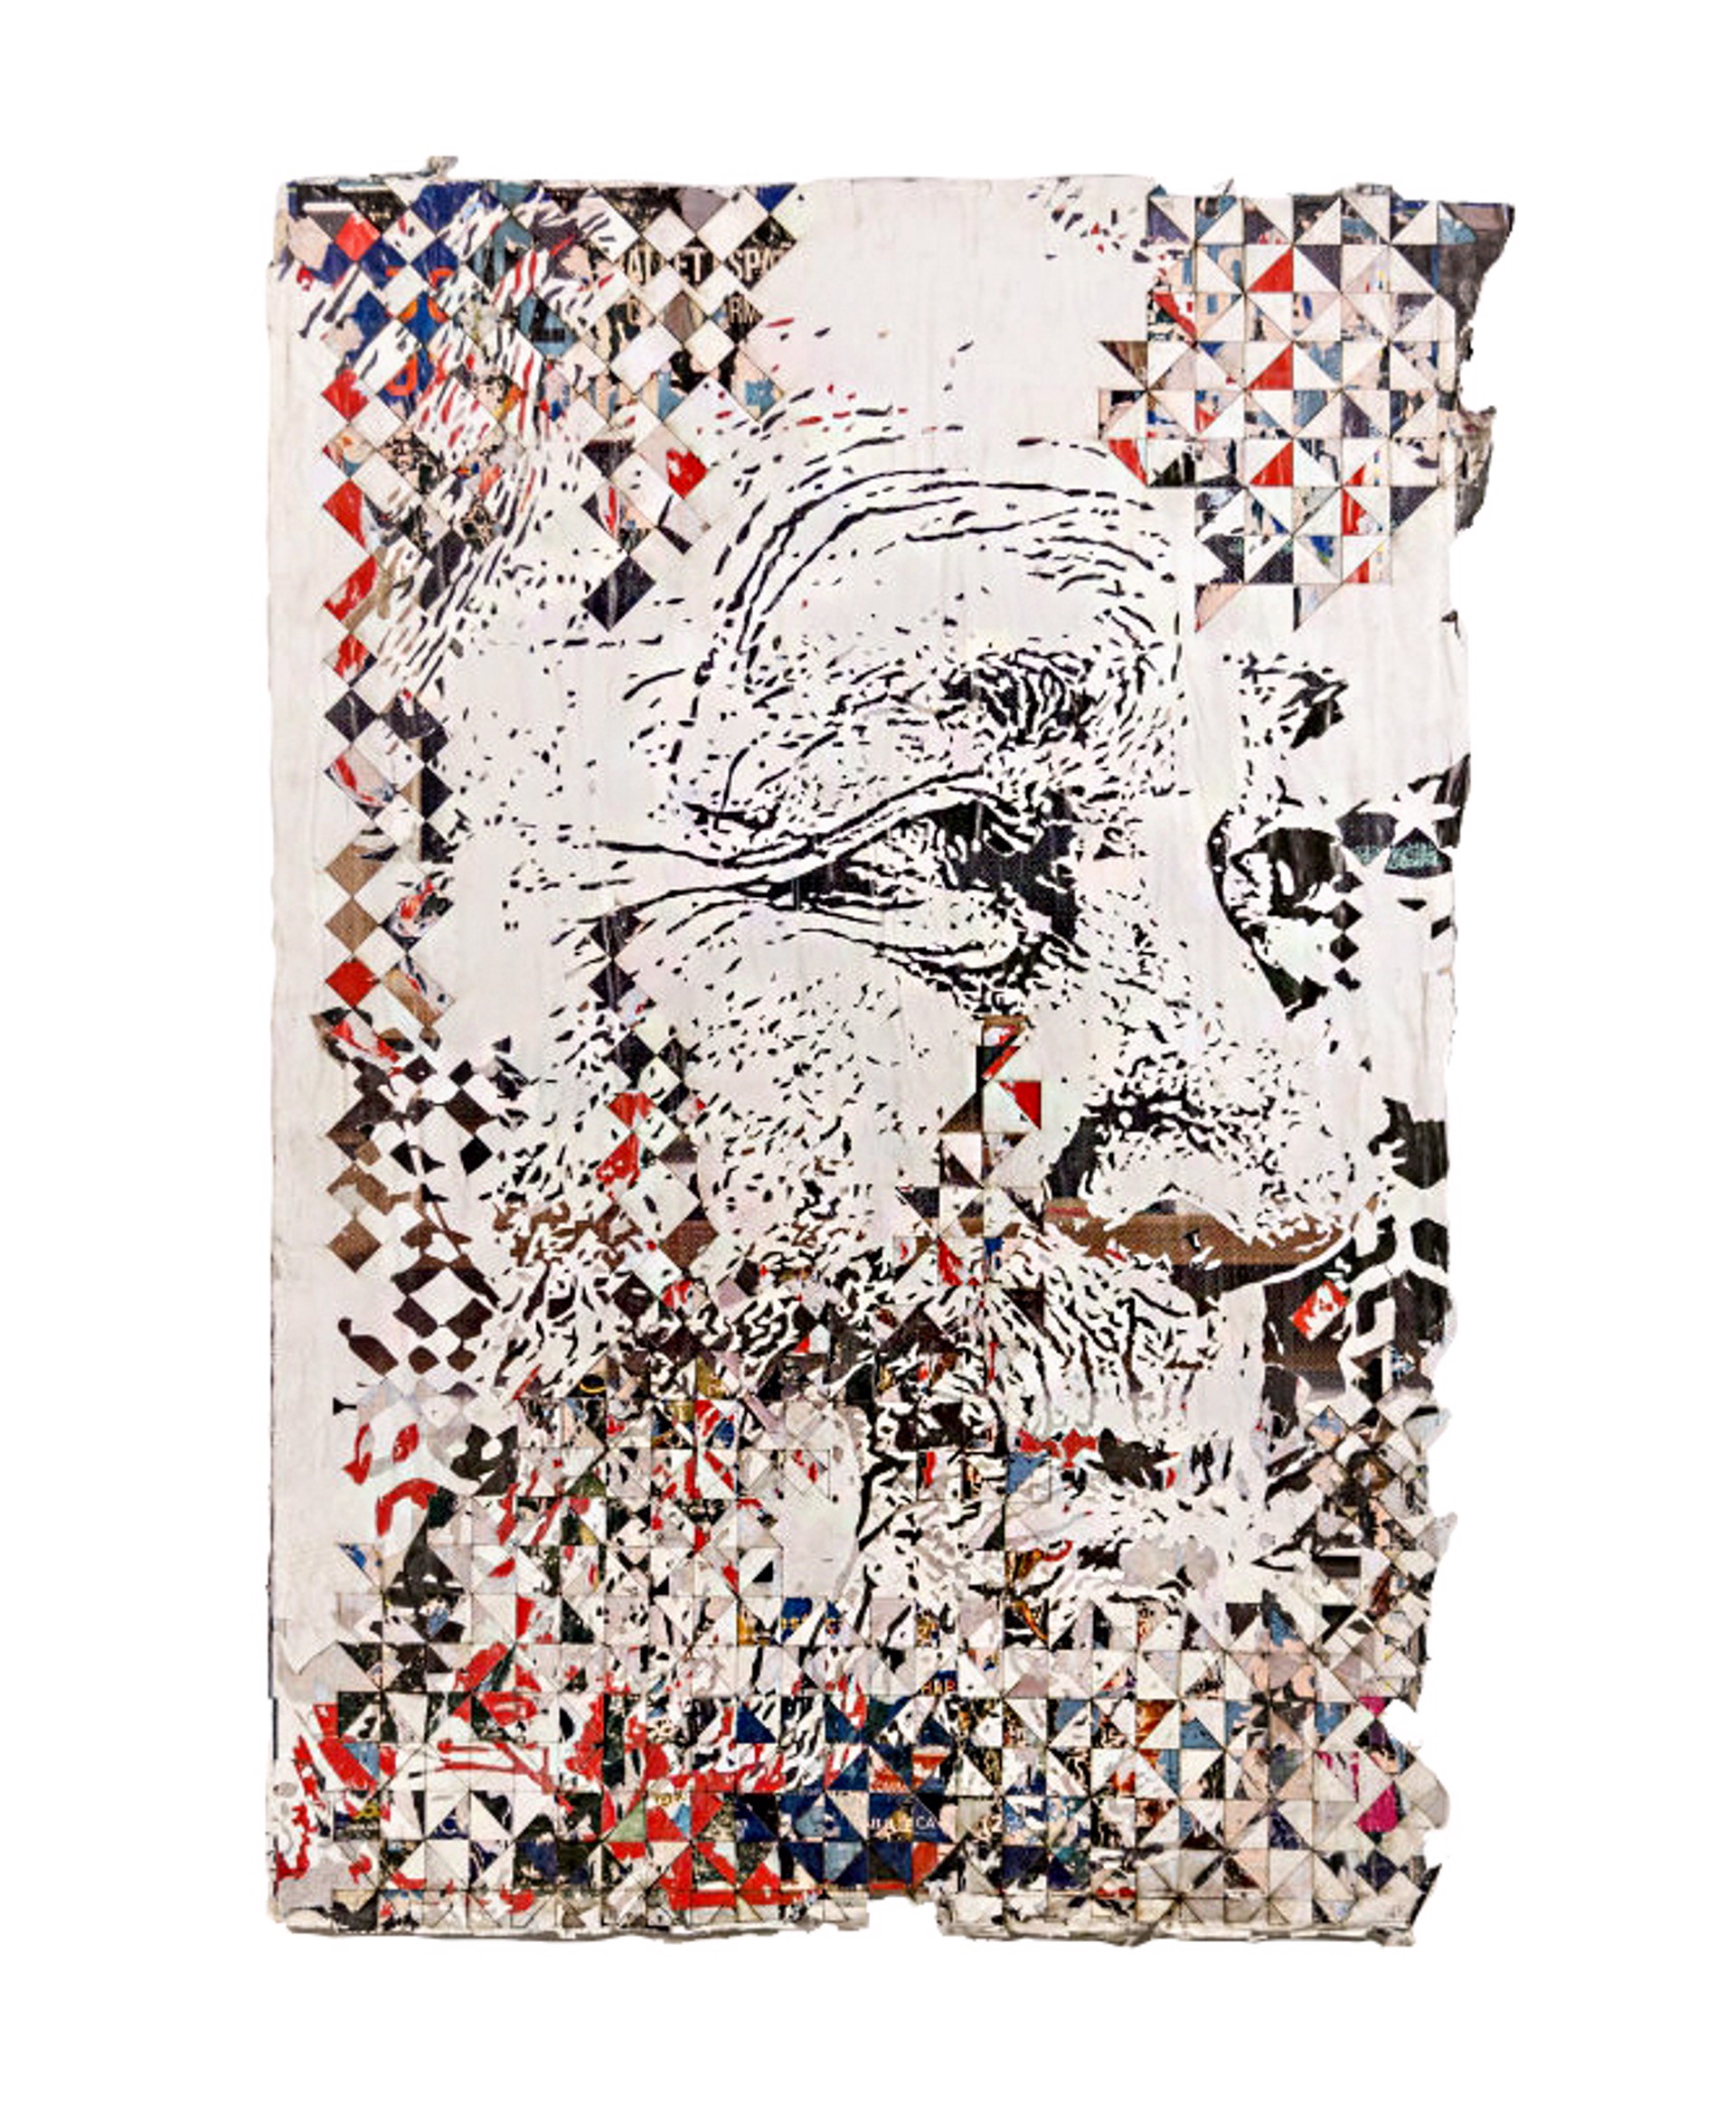 Dicey Series #23 by Vhils